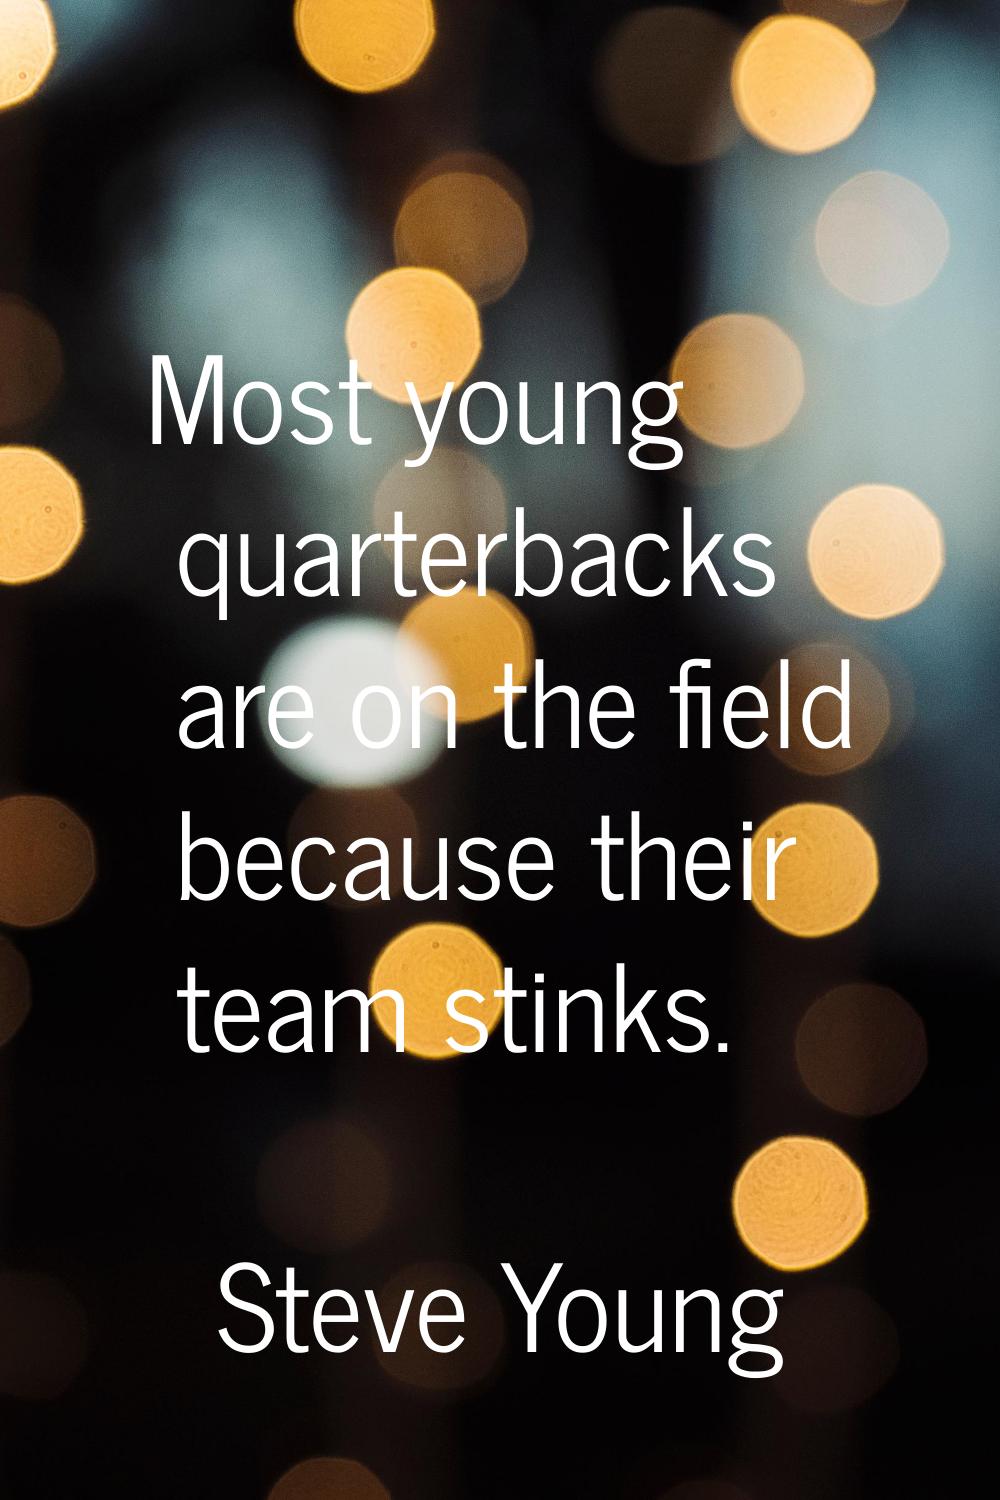 Most young quarterbacks are on the field because their team stinks.